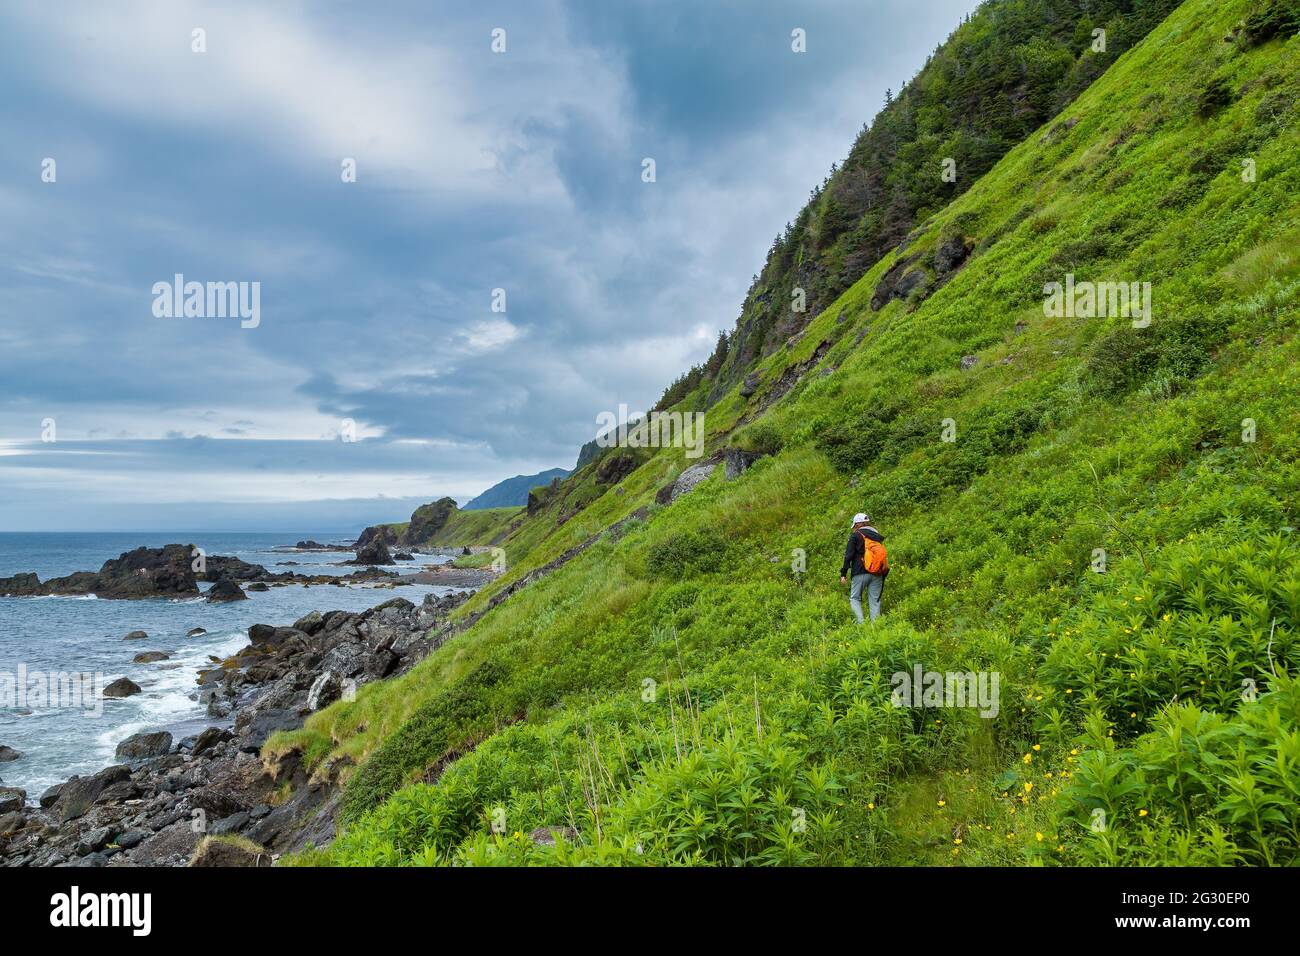 Woman Hiking In Mountains And Looking At The Scenic View, Trekking In The  Mountains